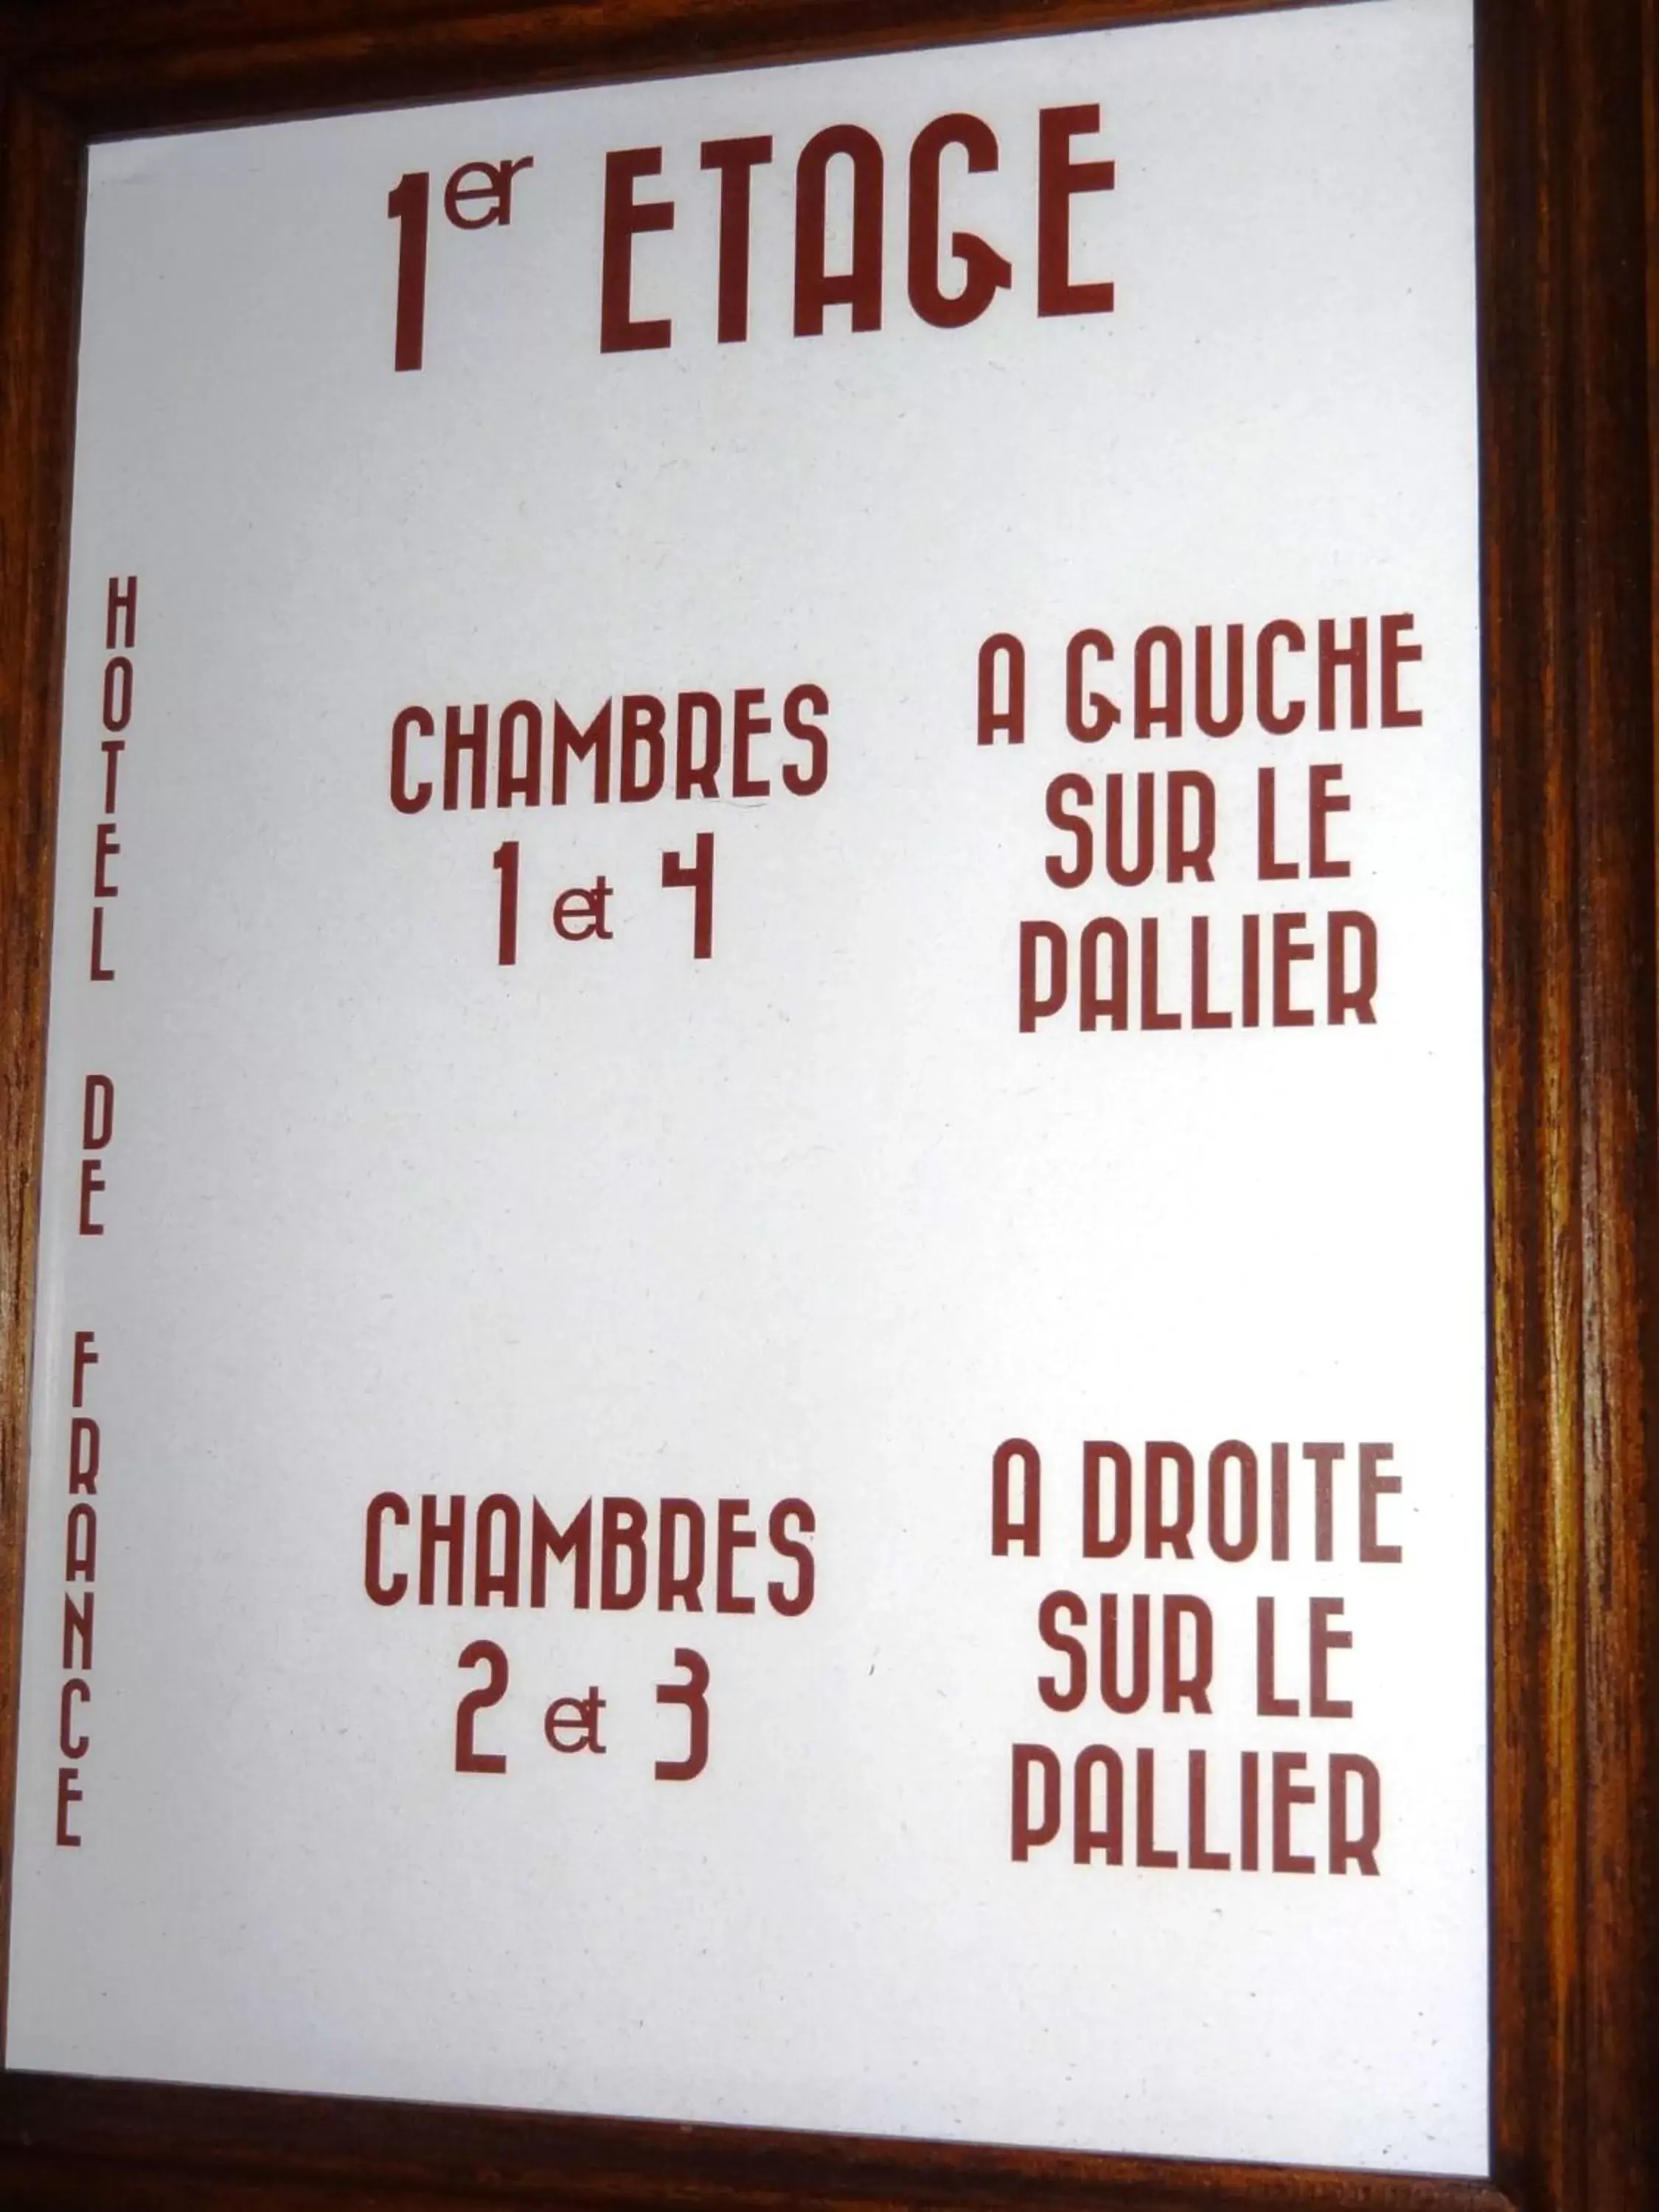 Text overlay in Hotel de France